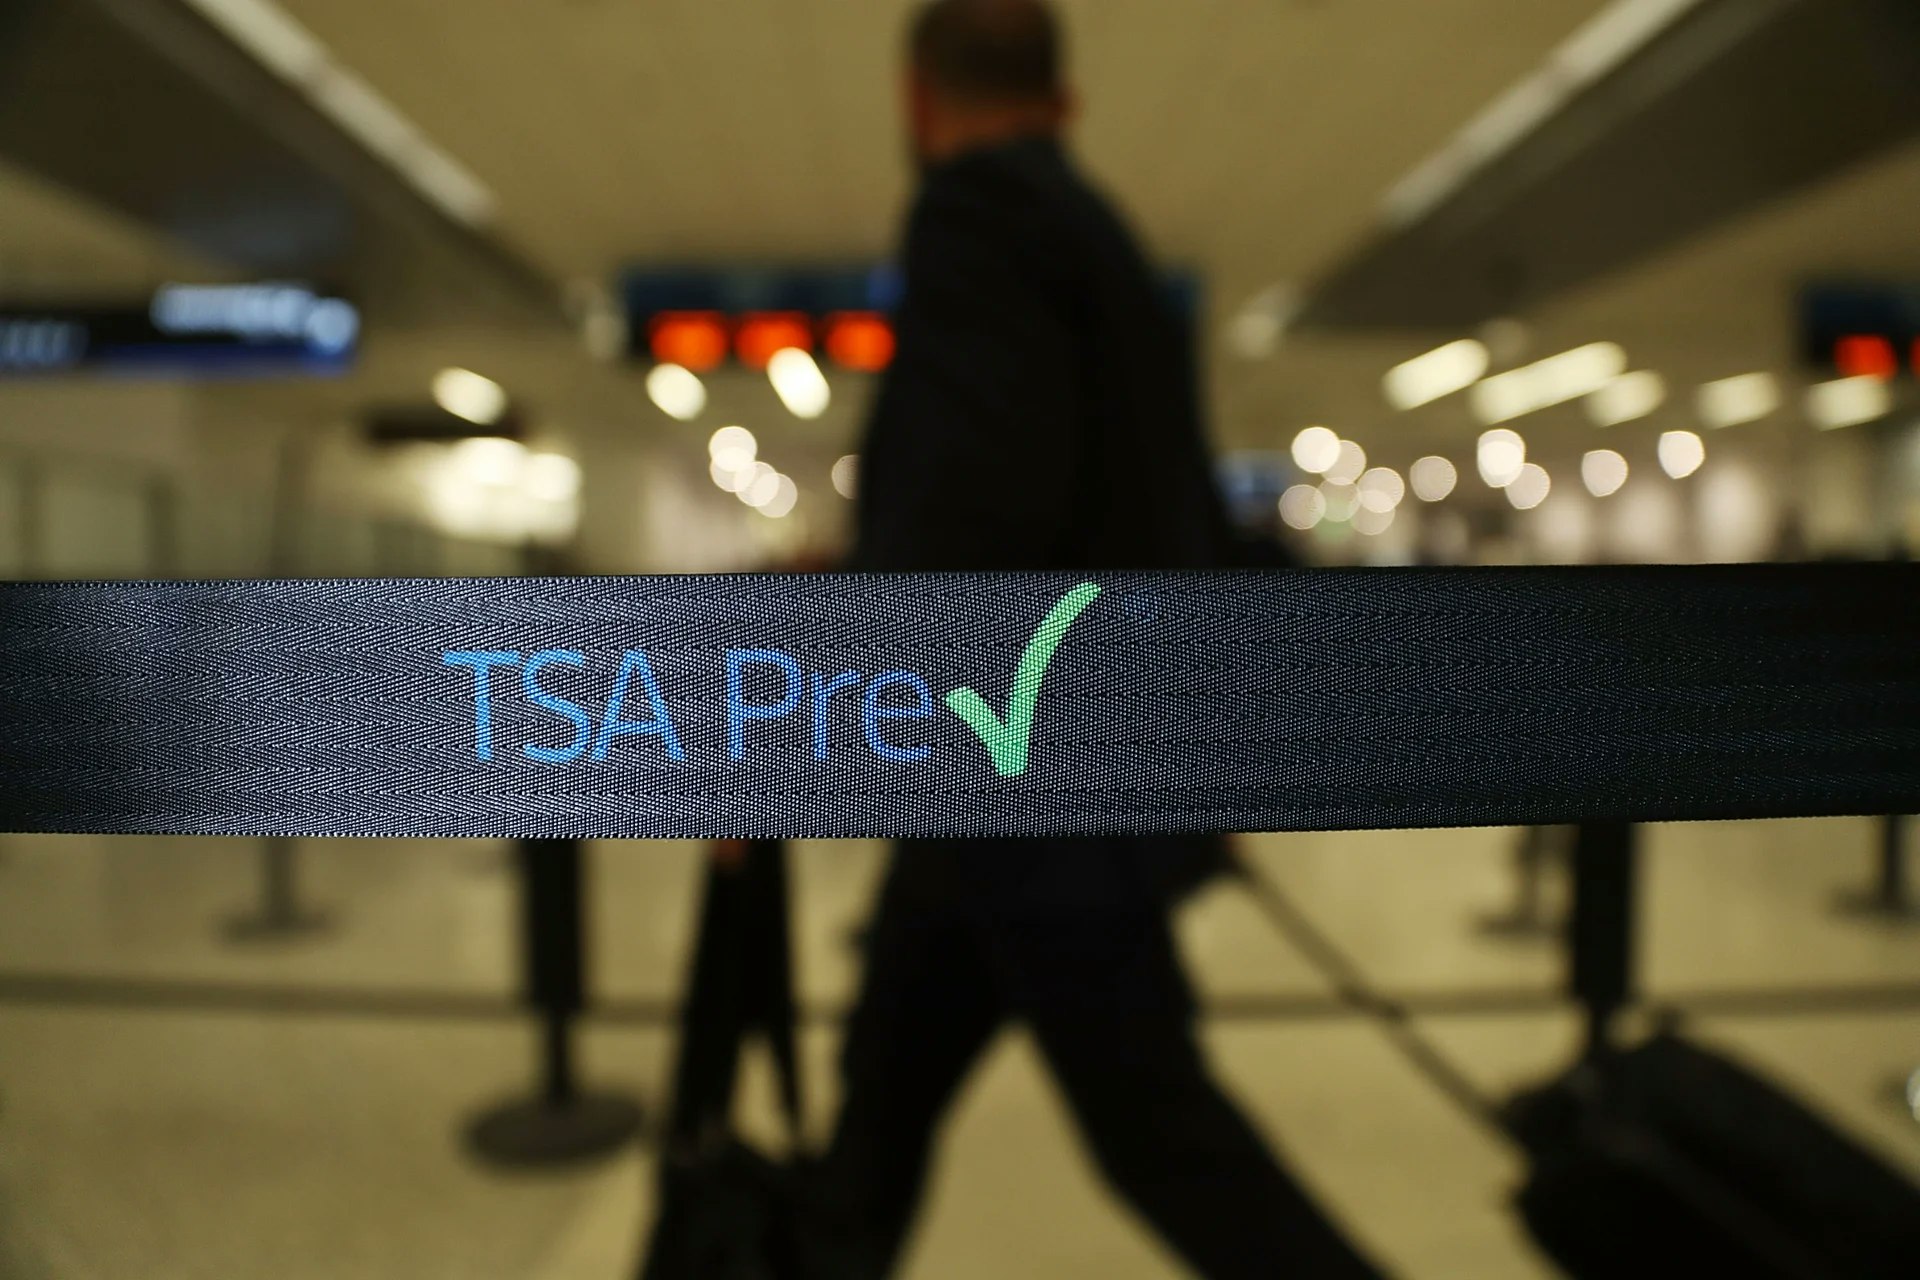 PreCheck offers expedited security clearance at airports in the US